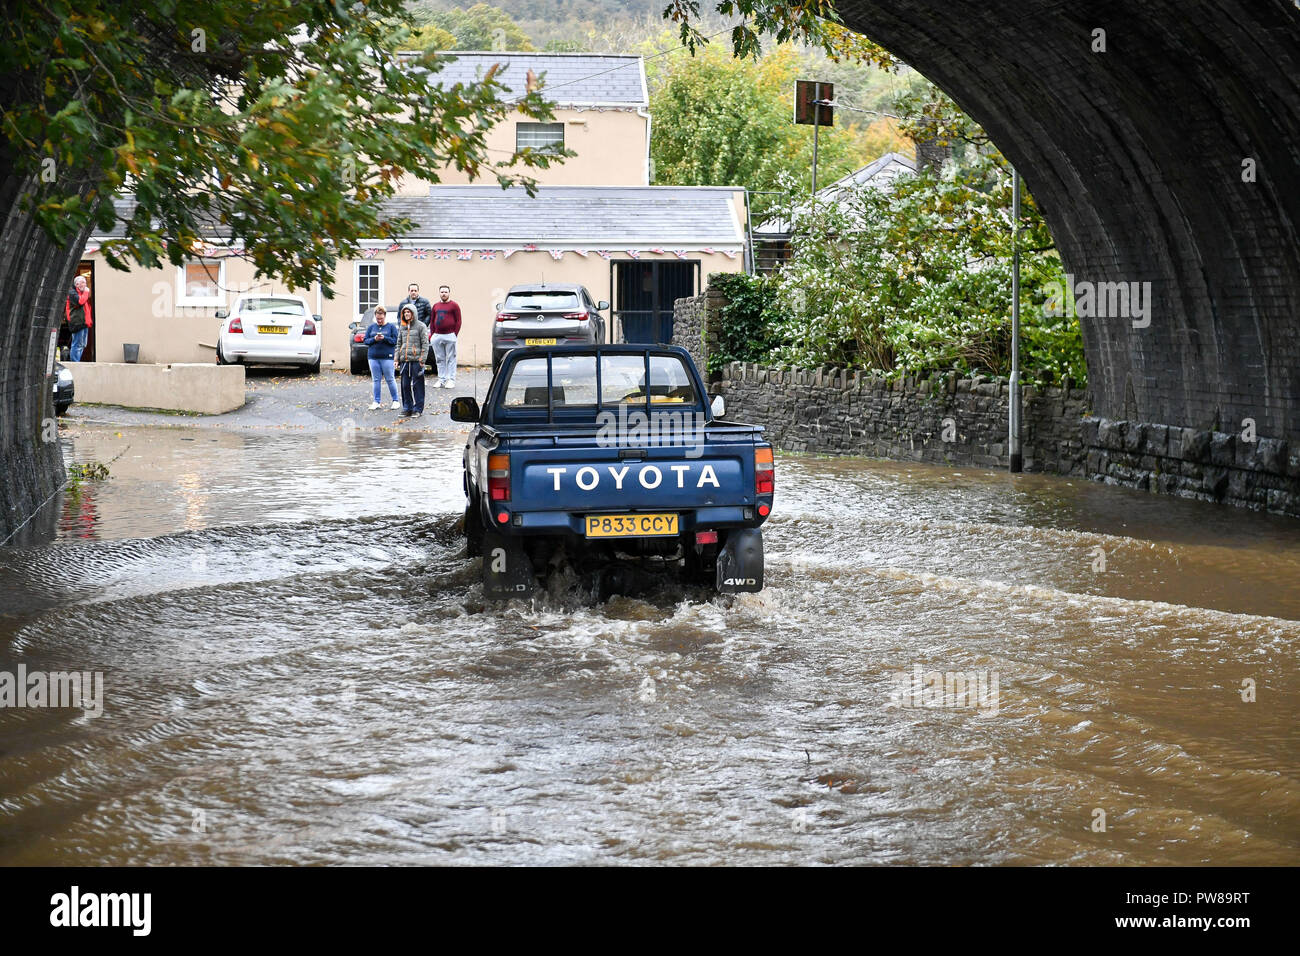 A 4x4 vehicle drives through flood water on the road to the Aberdulais Royal British Legion club in Aberdulais, Neath, South Wales, where an amber weather warning is in force across the region as heavy rain is causing flooding. Stock Photo